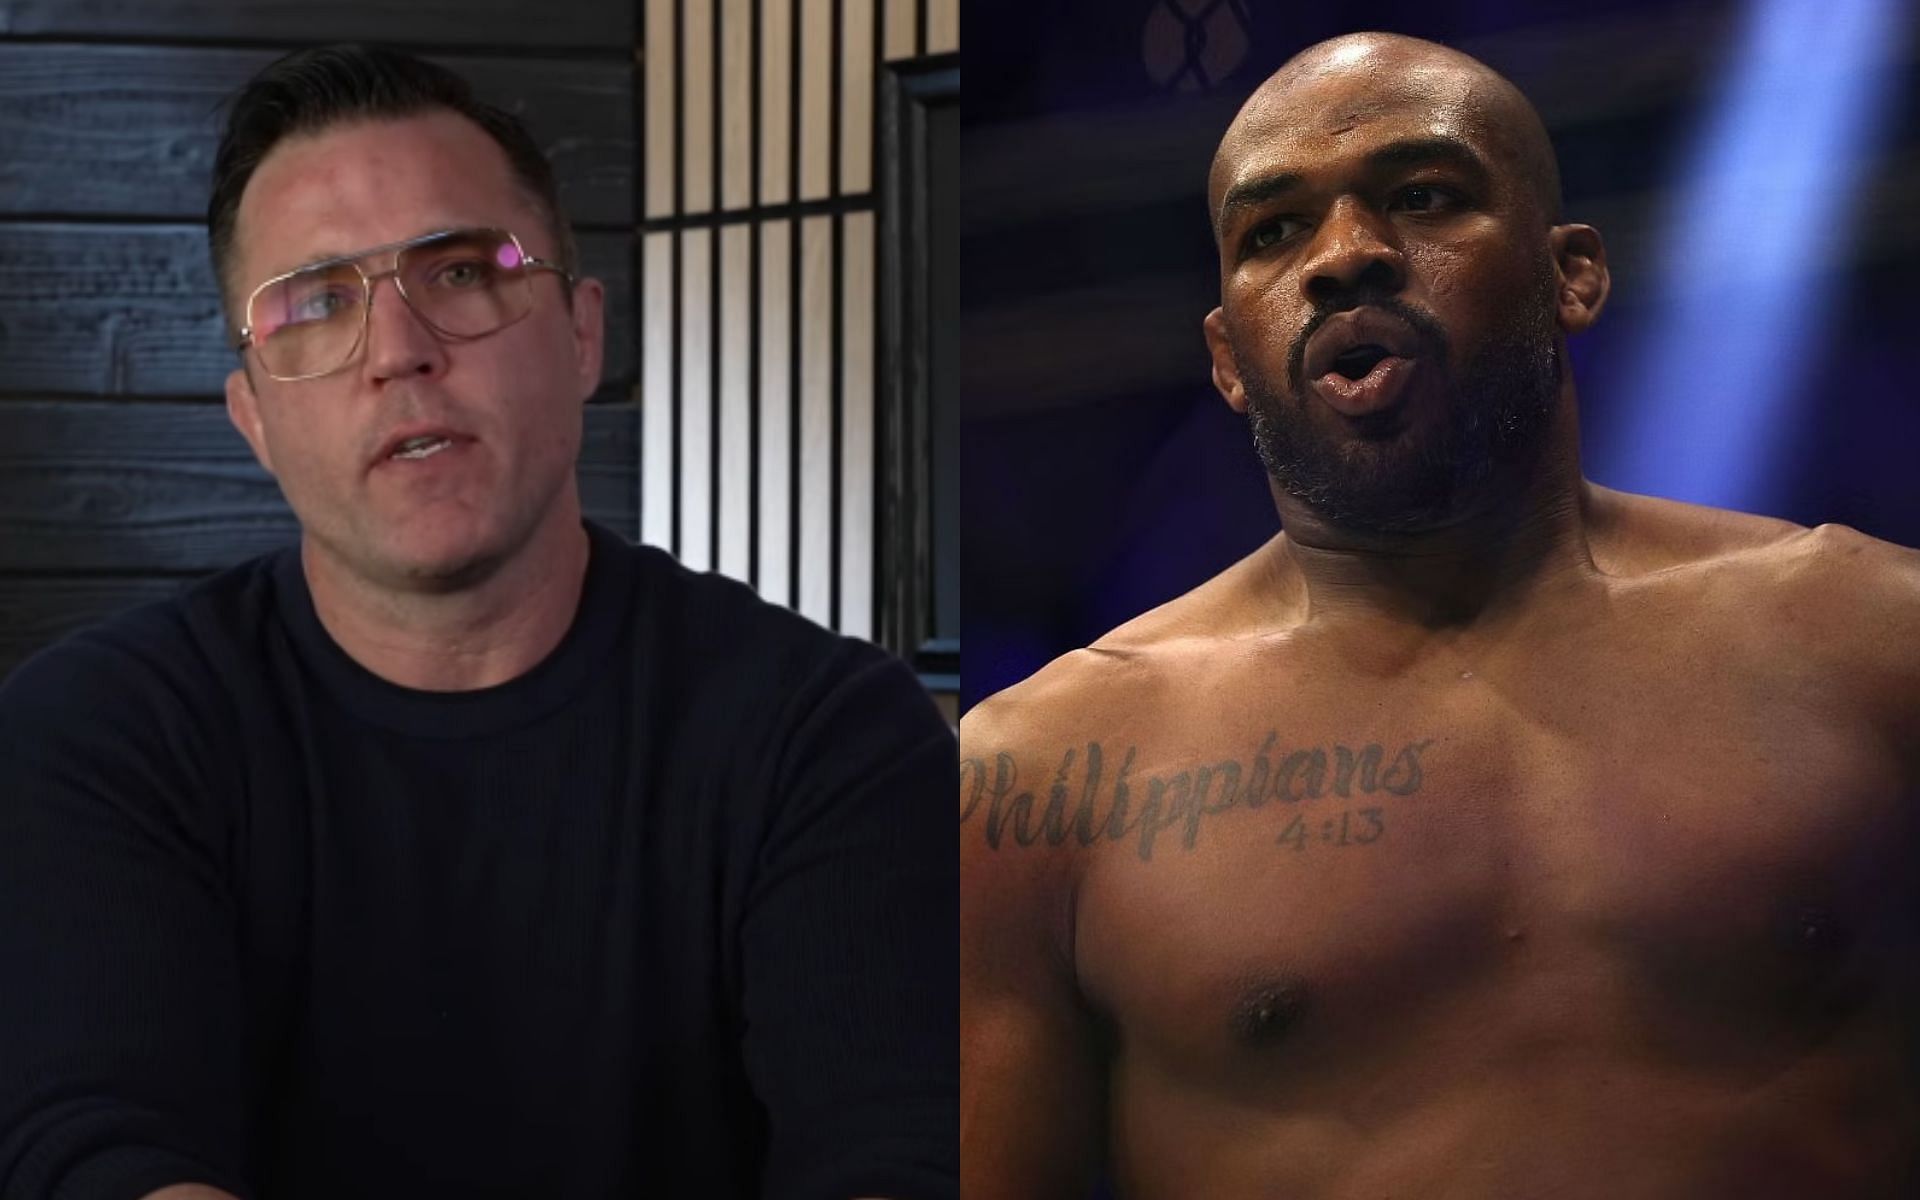 Chael Sonnen issues reaction after former for Jon Jones gets accused of threatening to kill female agent [Image courtesy: Chael Sonnen - YouTube, and Getty Images]